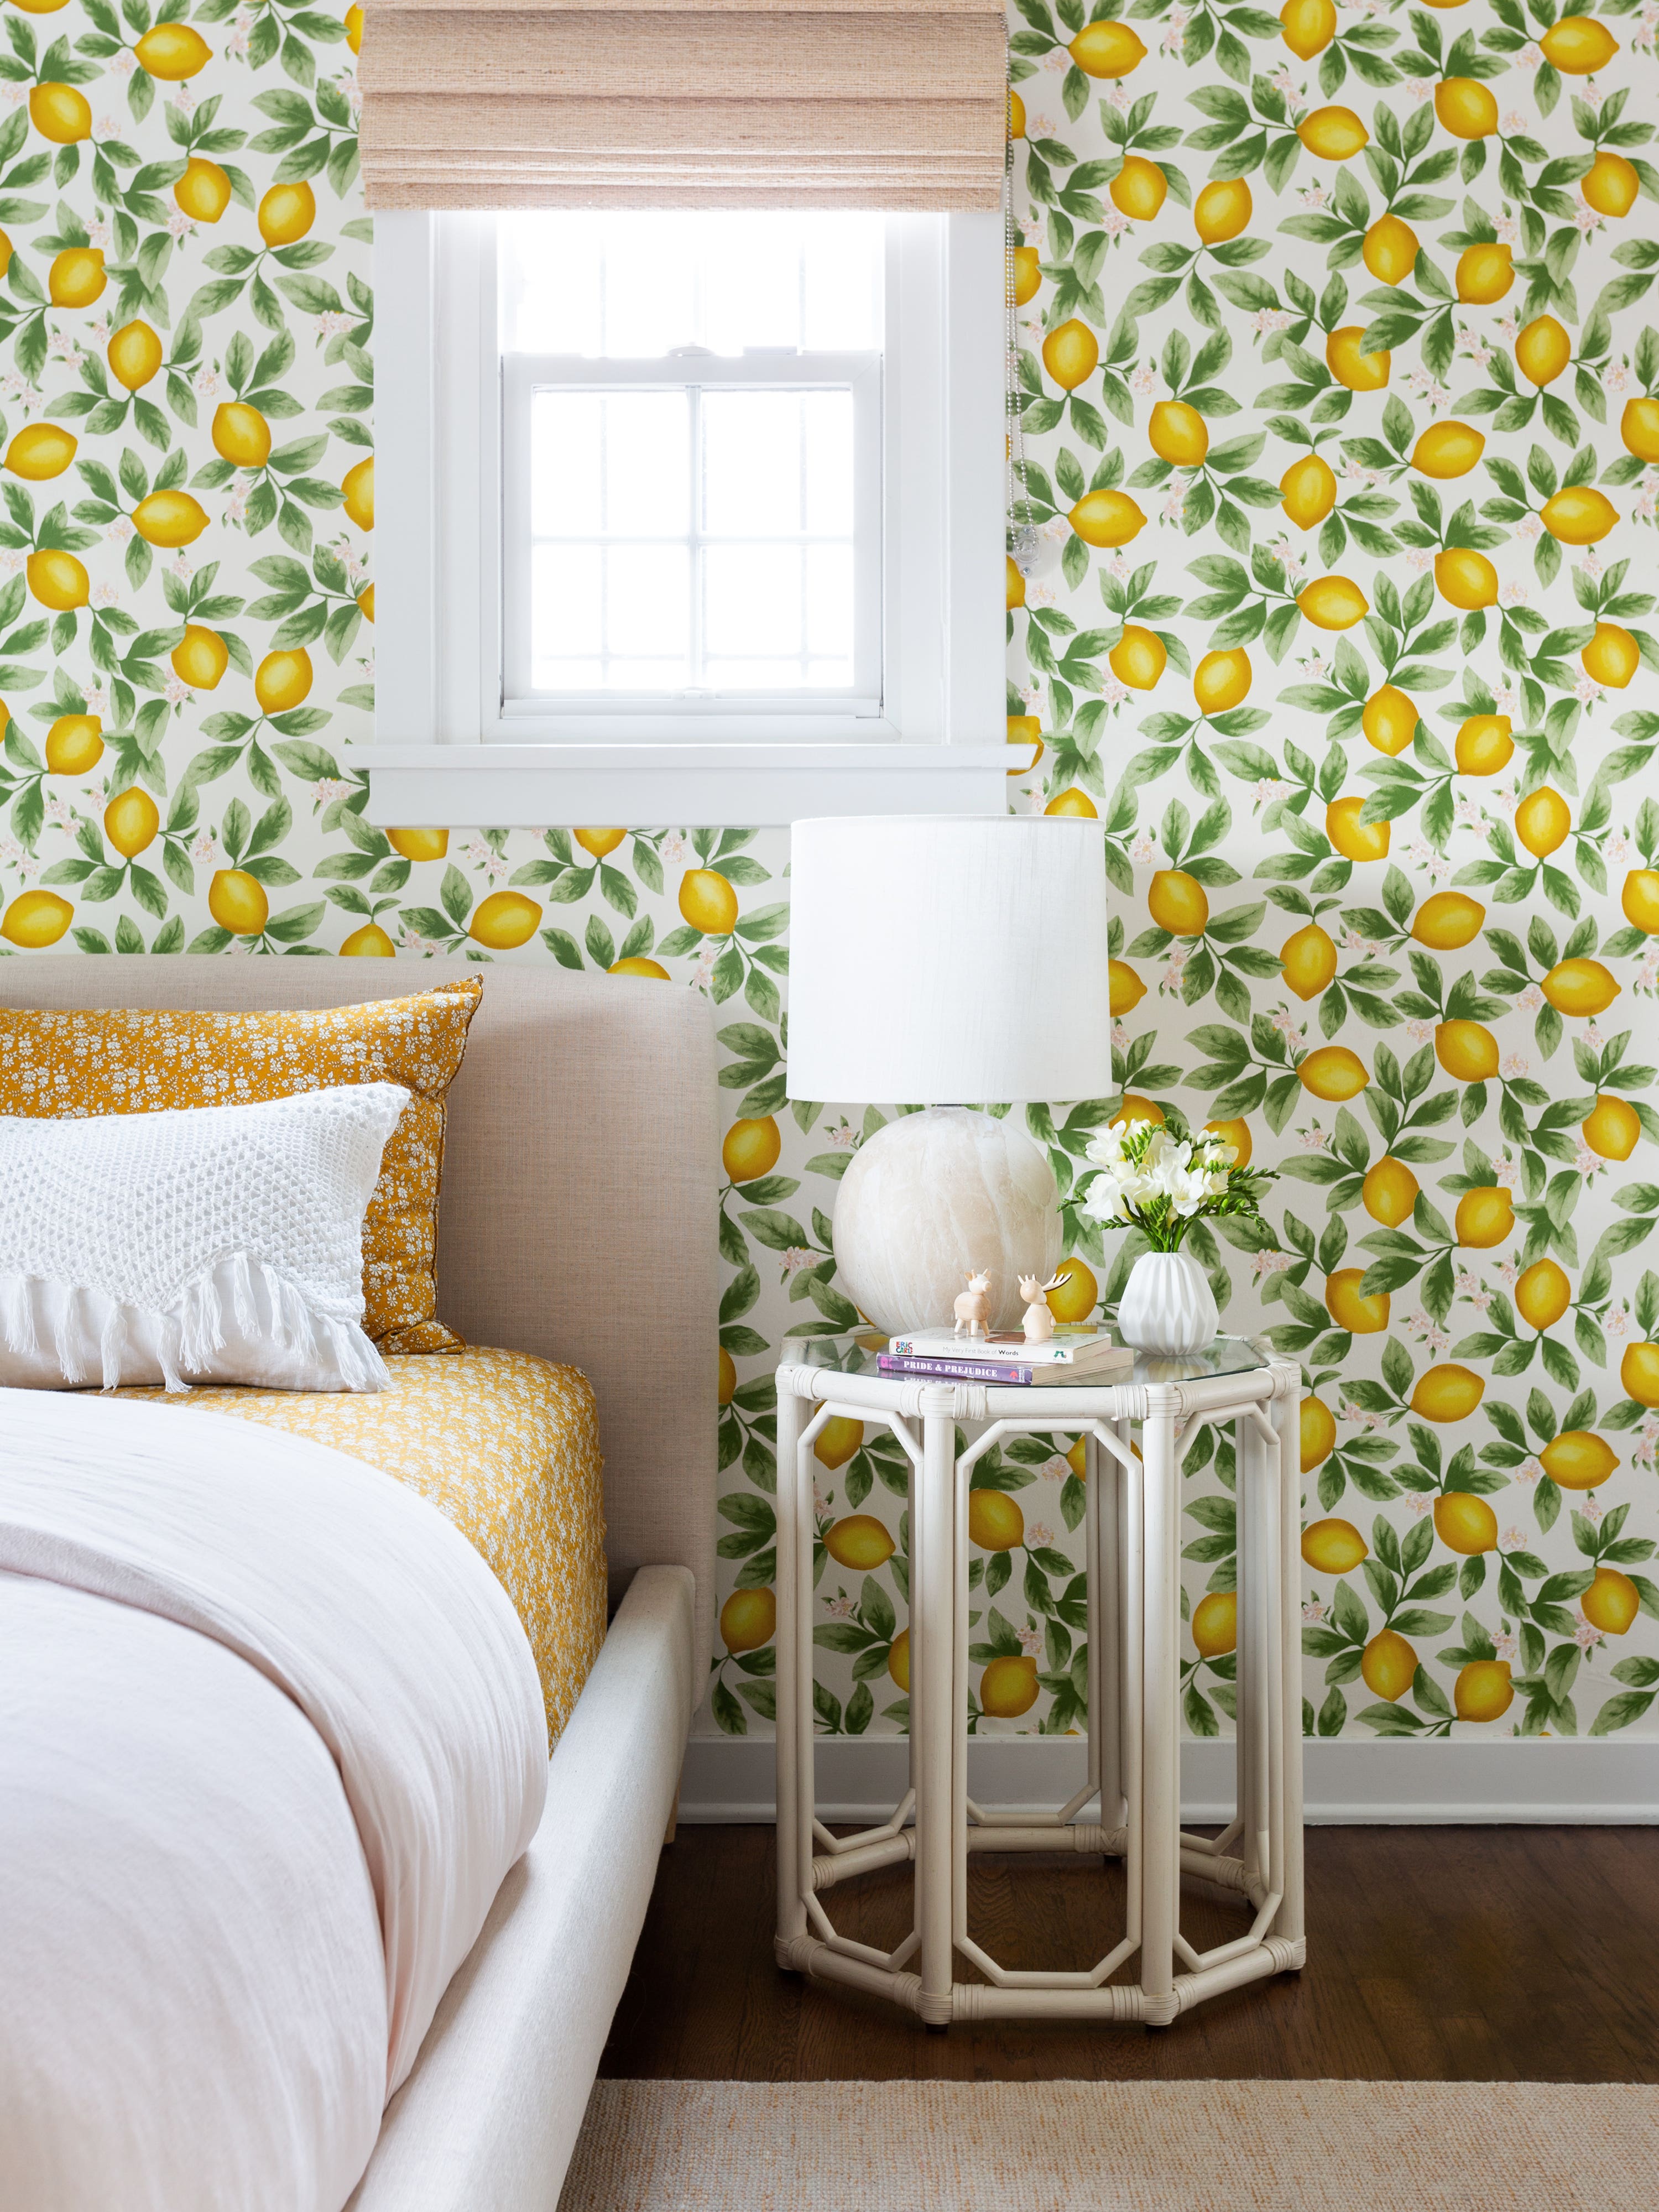 The Citrus Wallpapers in These Spaces Capture the Essence of Summer